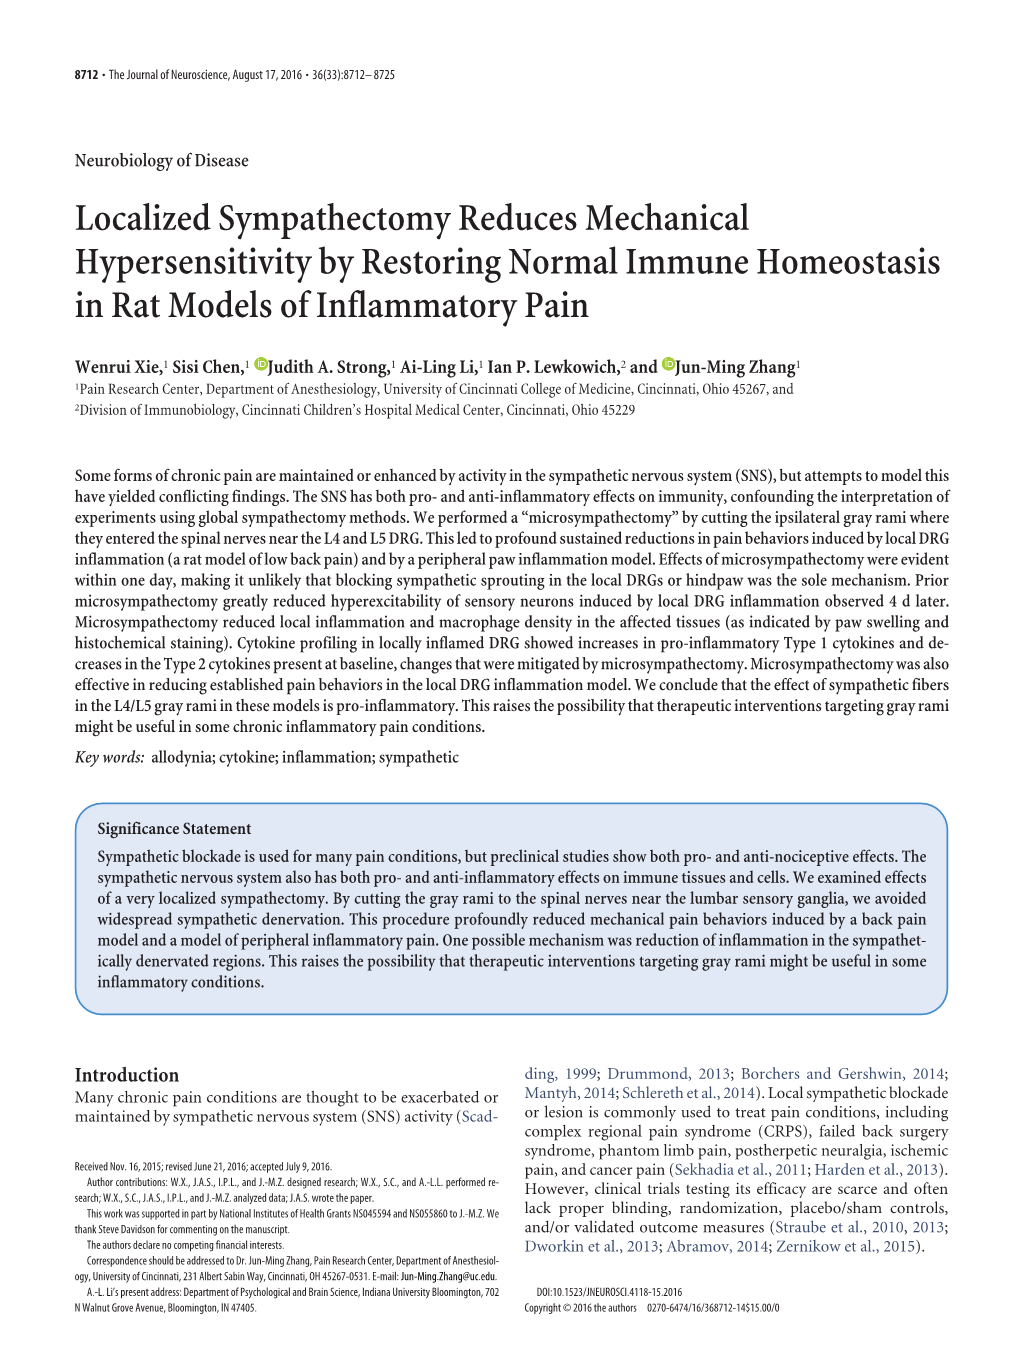 Localized Sympathectomy Reduces Mechanical Hypersensitivity by Restoring Normal Immune Homeostasis in Rat Models of Inflammatory Pain